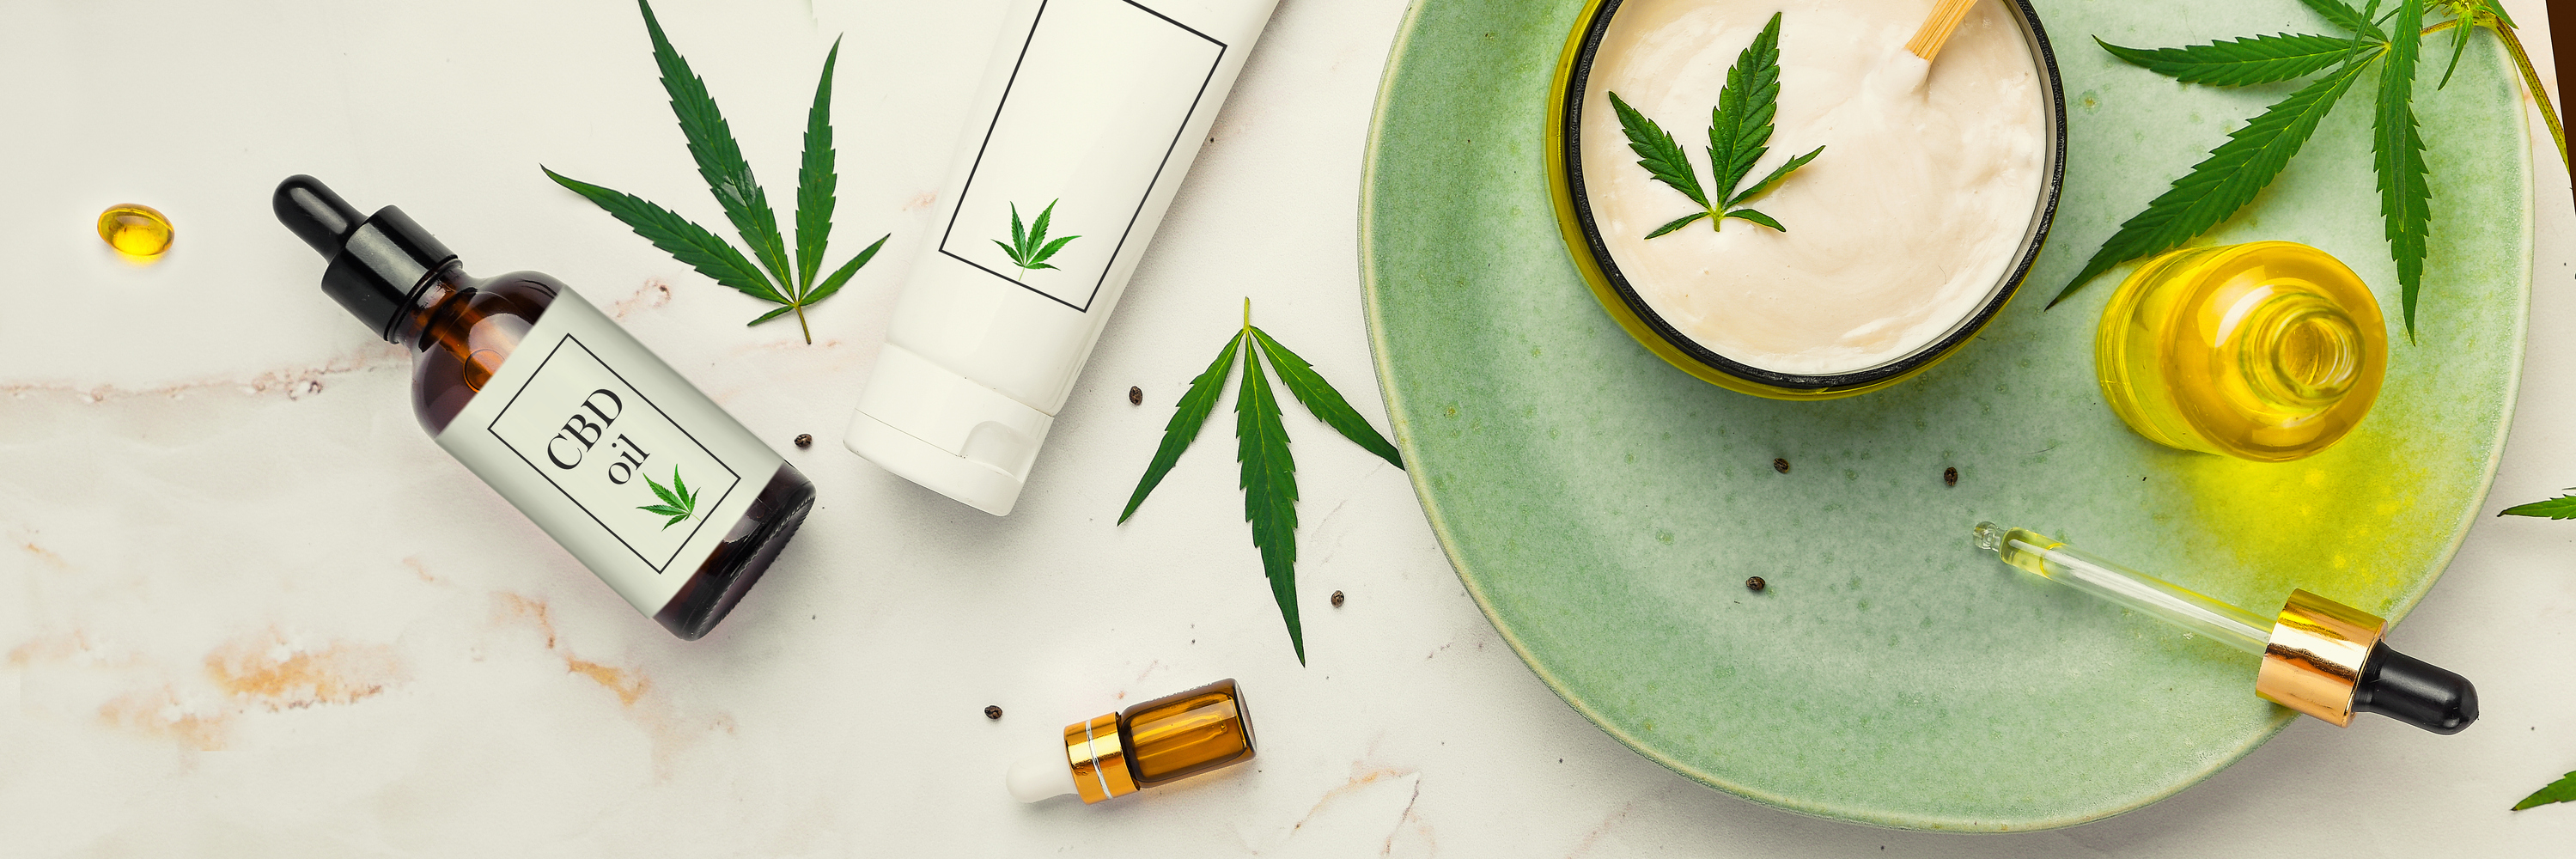 5 Best CBD Oils to Buy in 2021 - A Buyer's Guide - Paid Content - Detroit -  Detroit Metro Times